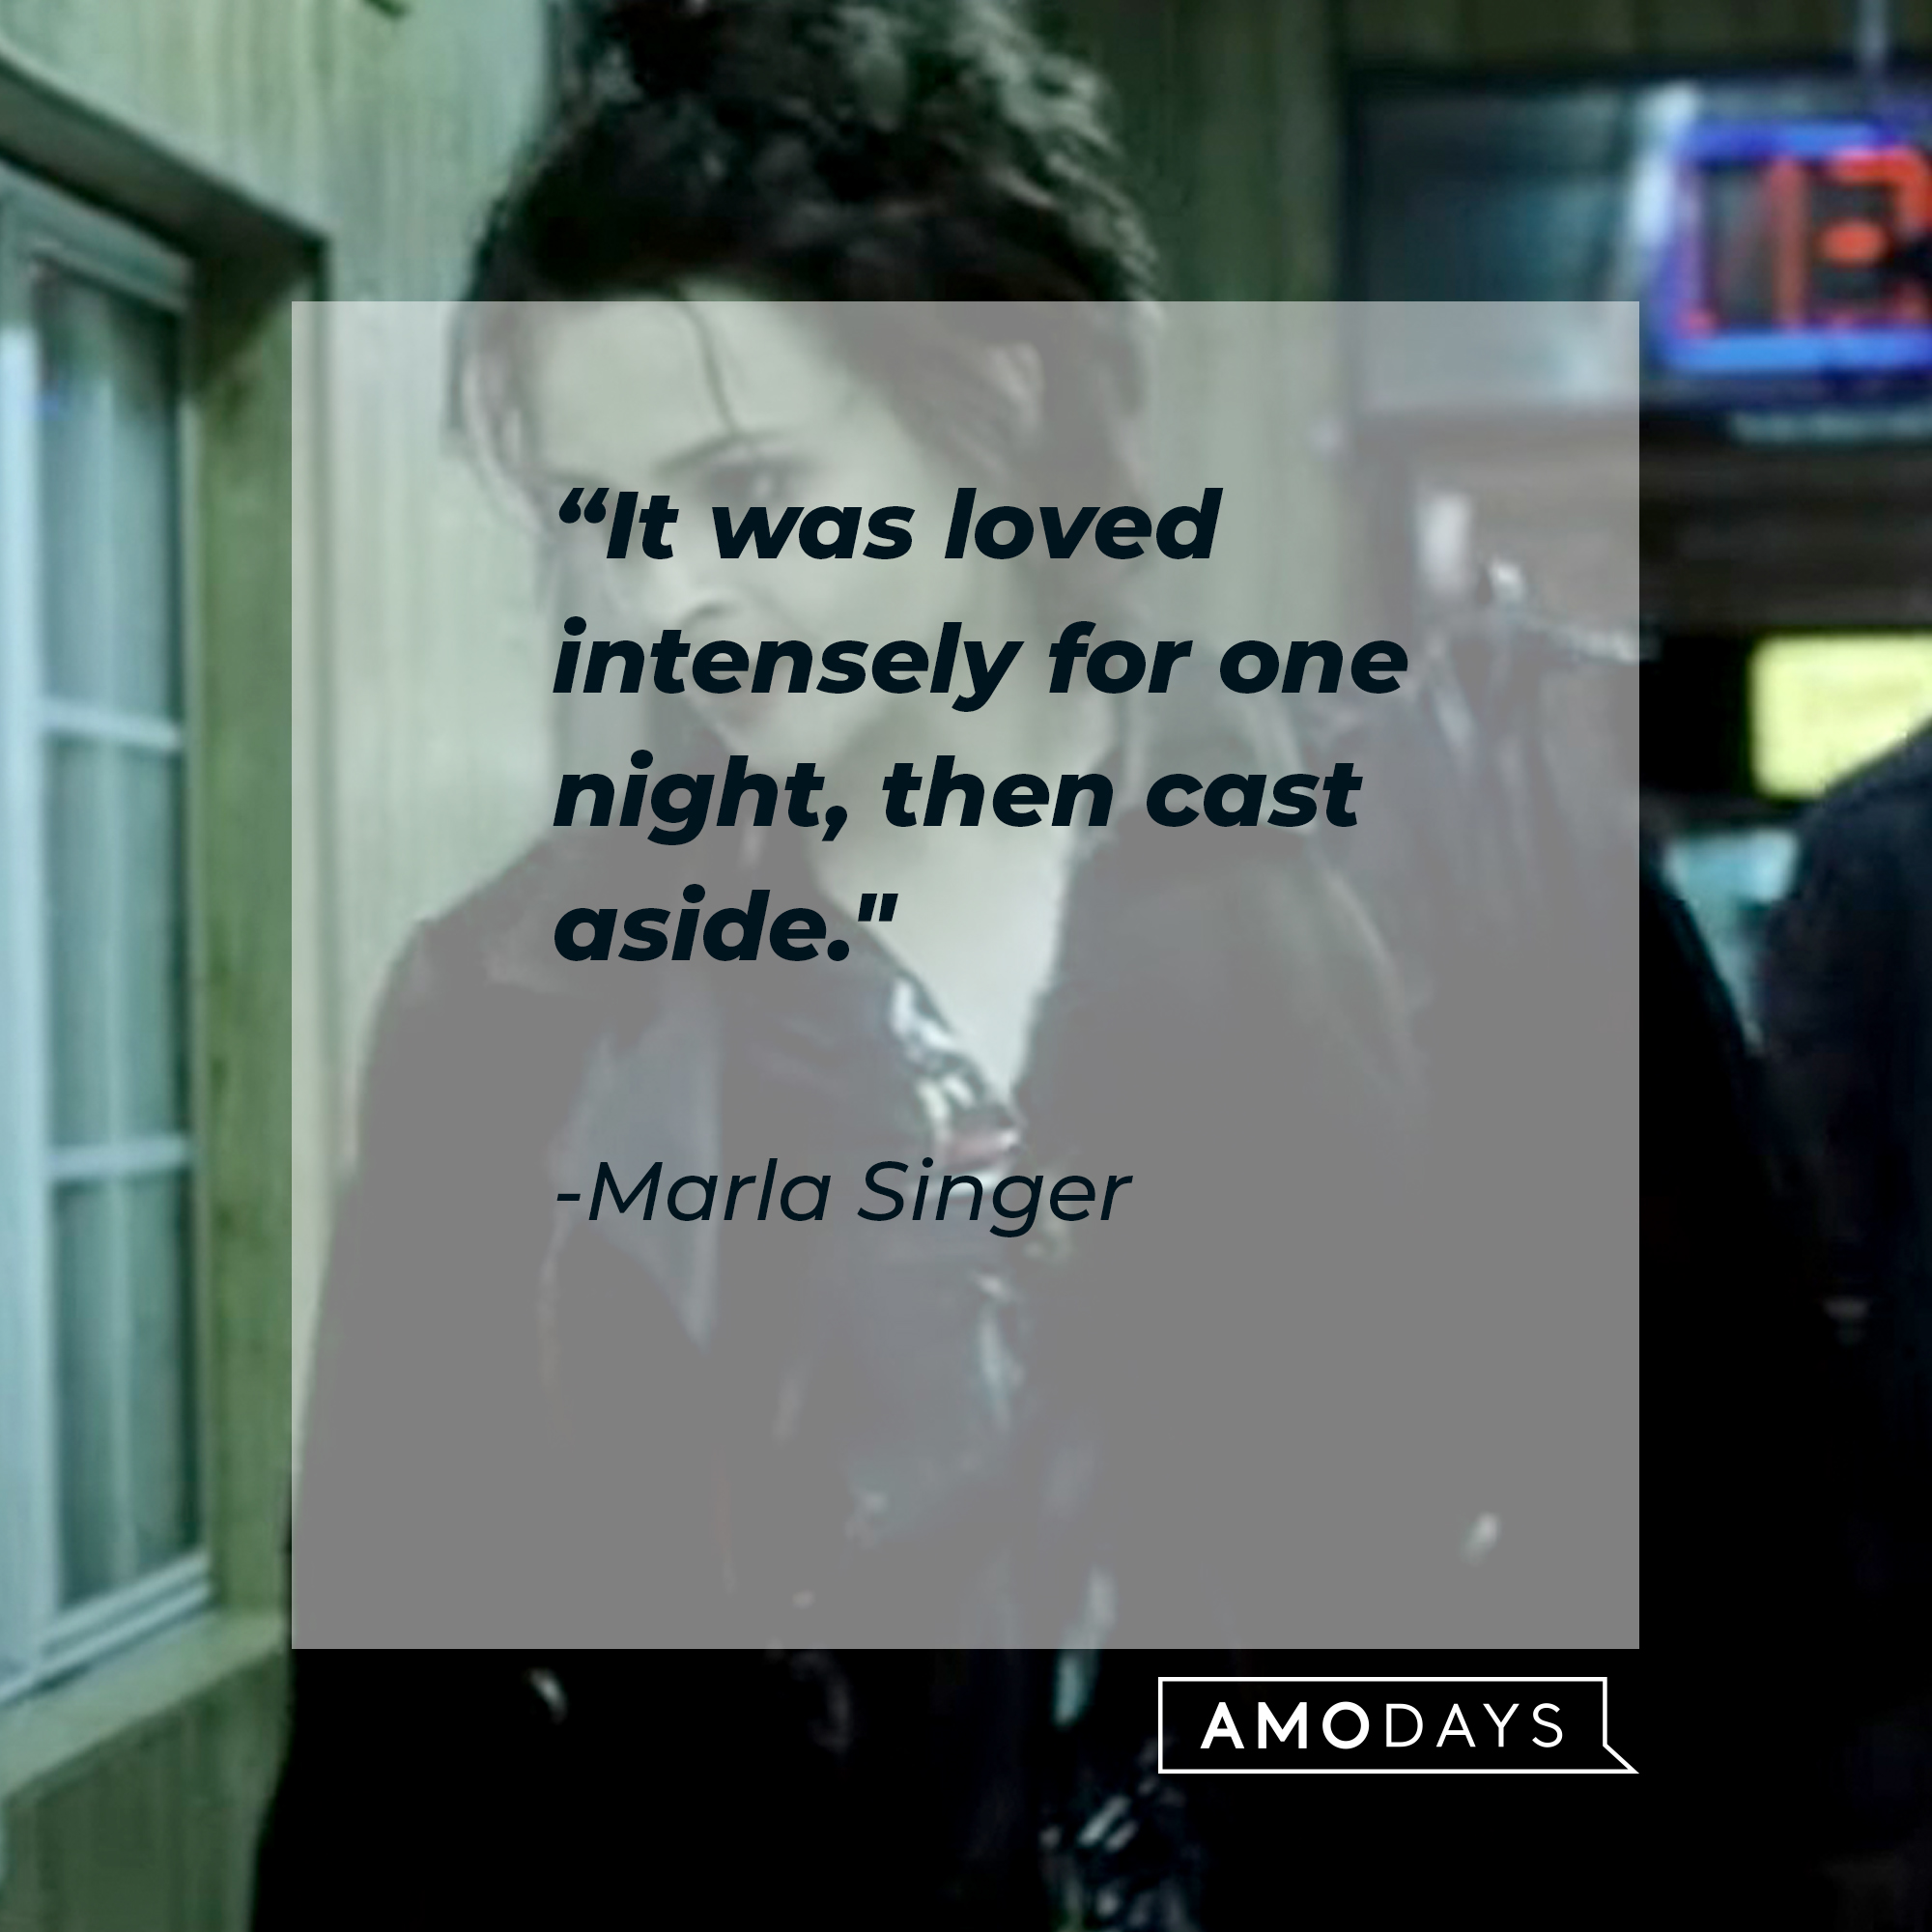 An image of Marla Singer with her quote:It was loved intensely for one night, then cast aside.!”| Image: facebook.com/FightClub